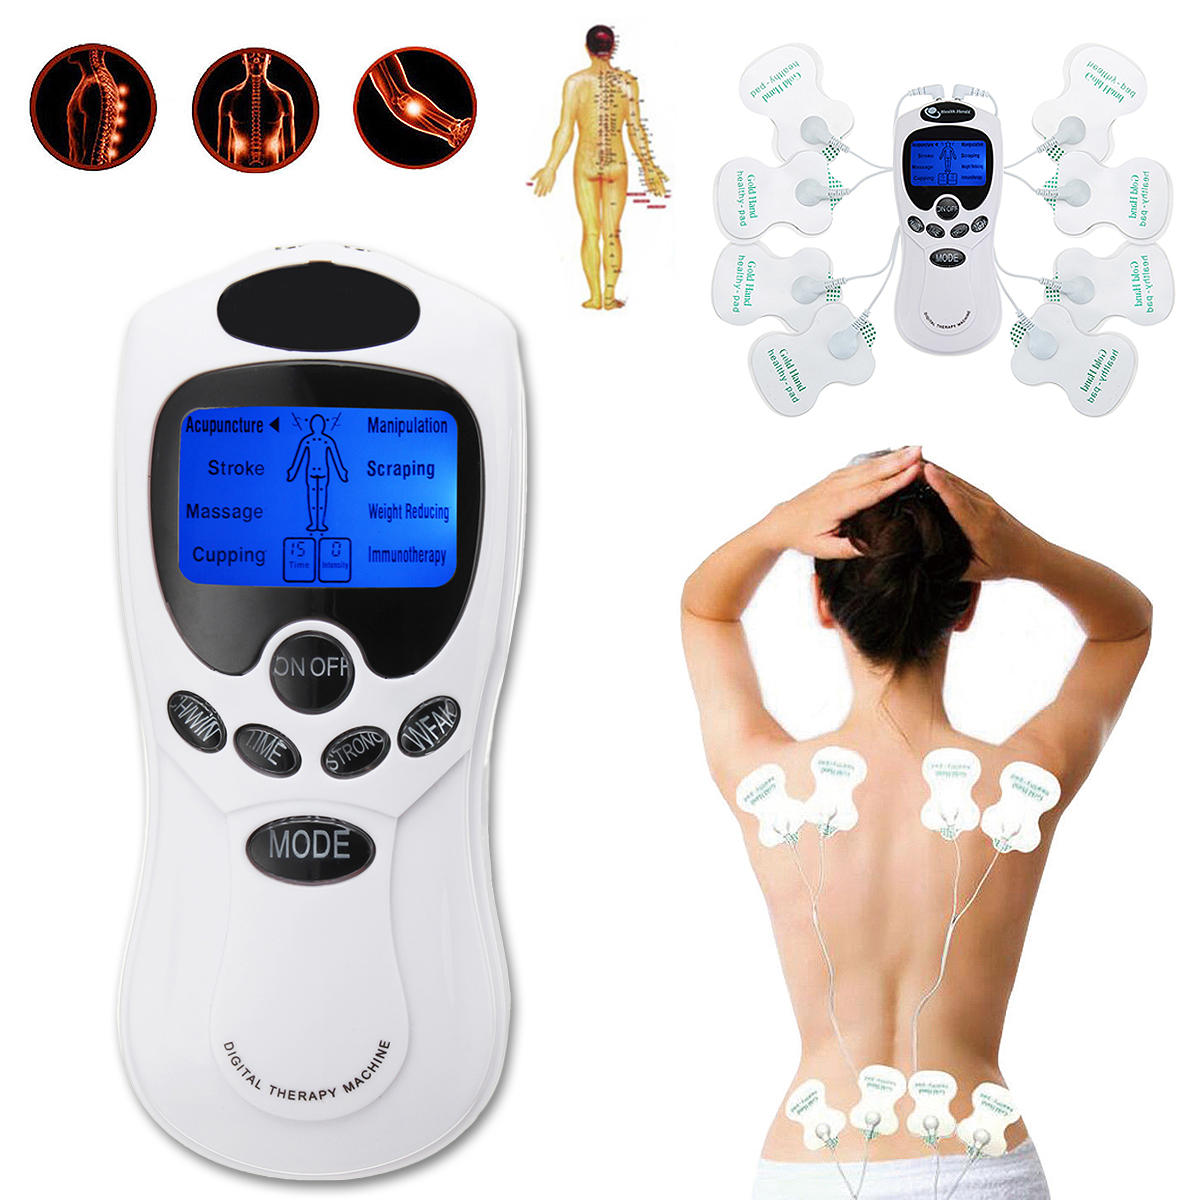 Unit 8 Modes Meridian Physiotherapy Instrument Fitness Fatigue Muscle Relif Electric Pulse Massager